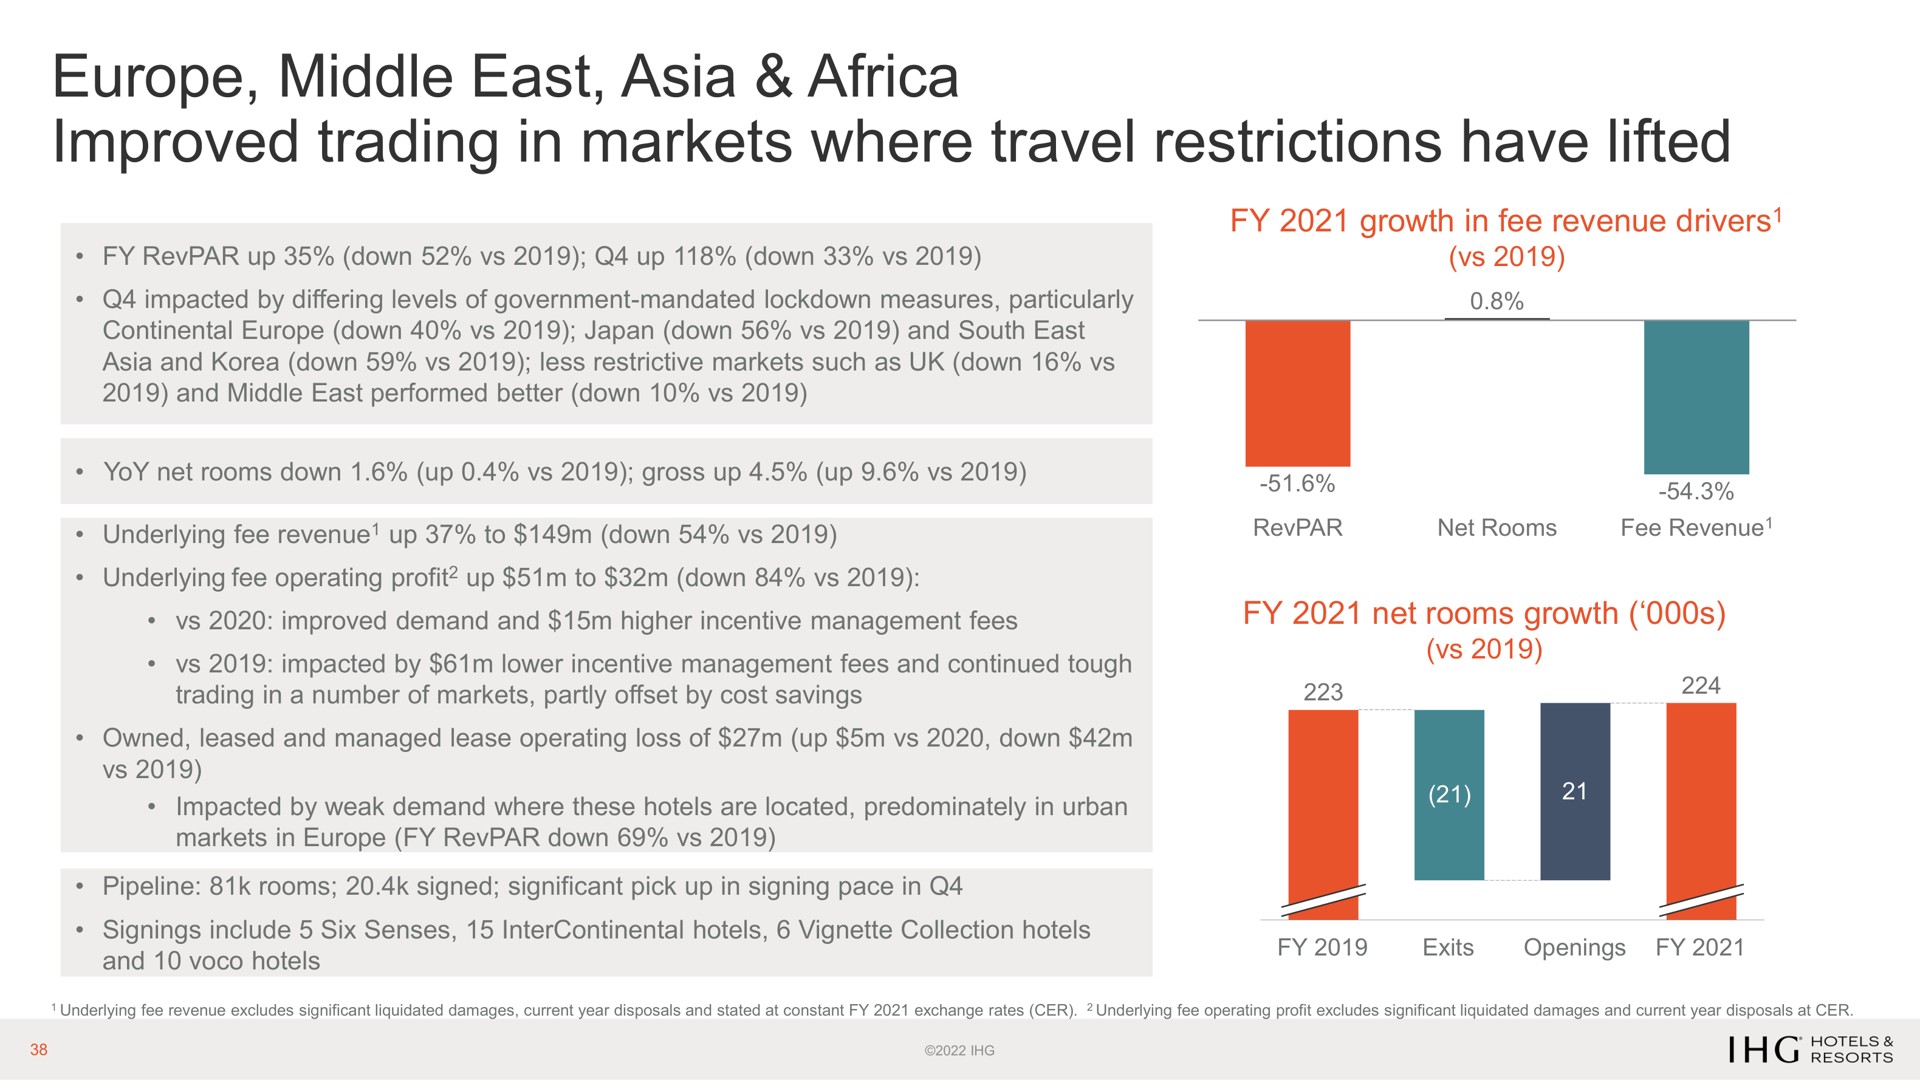 middle east improved trading in markets where travel restrictions have lifted | IHG Hotels